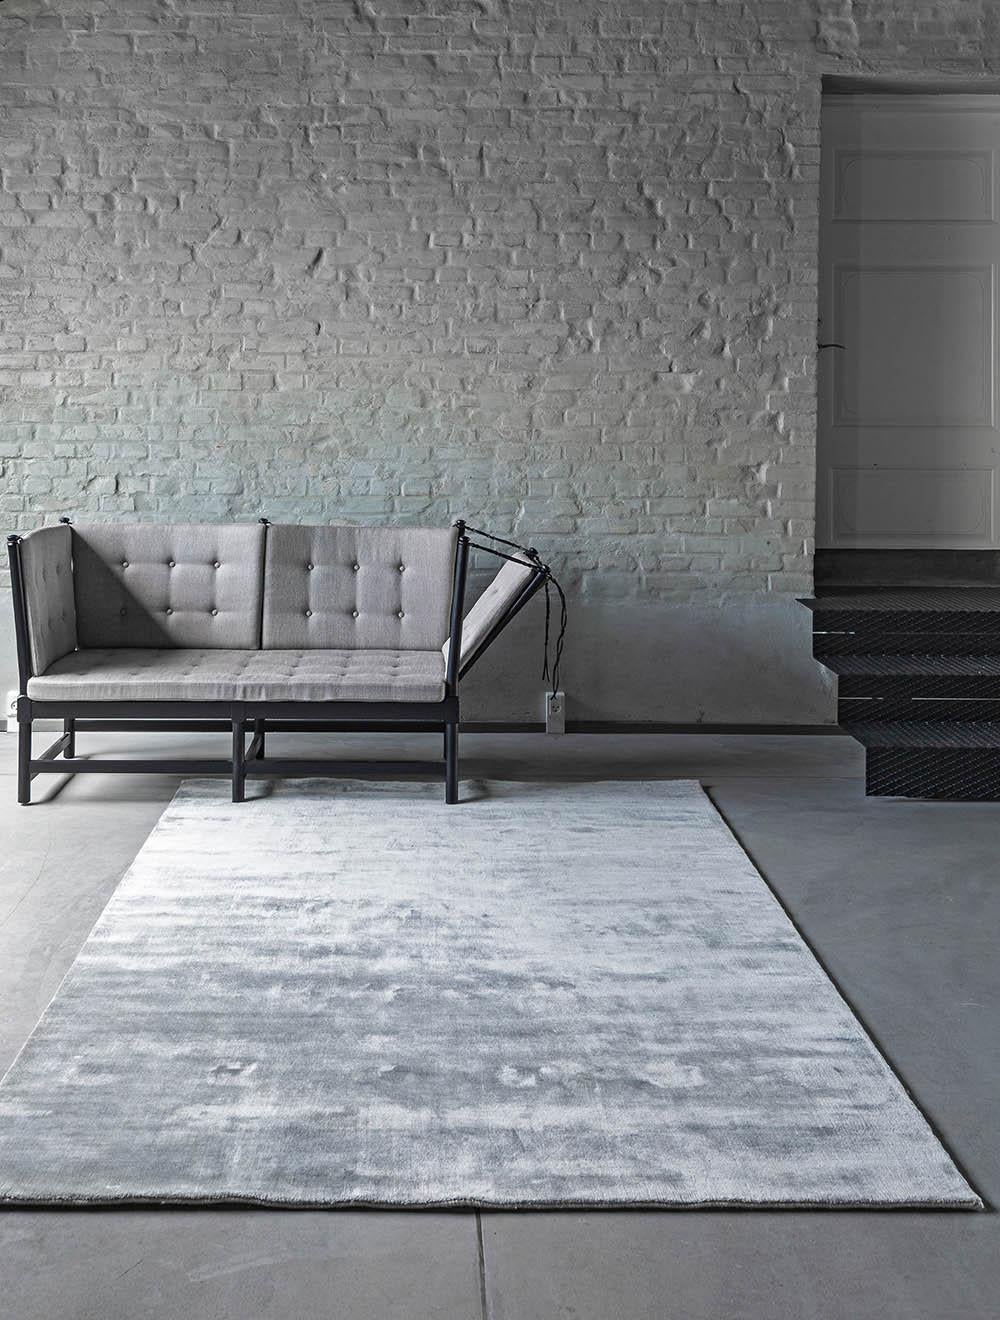 Concrete Earth bamboo carpet by Massimo Copenhagen
Handwoven
Materials: 50% New Zealand Wool, 50% Bamboo
Dimensions: W 300 x H 400 cm
Available colors: nougat rose, cashmere, soft grey, concrete, warm grey, mustard yellow, vibrant blue, camel,